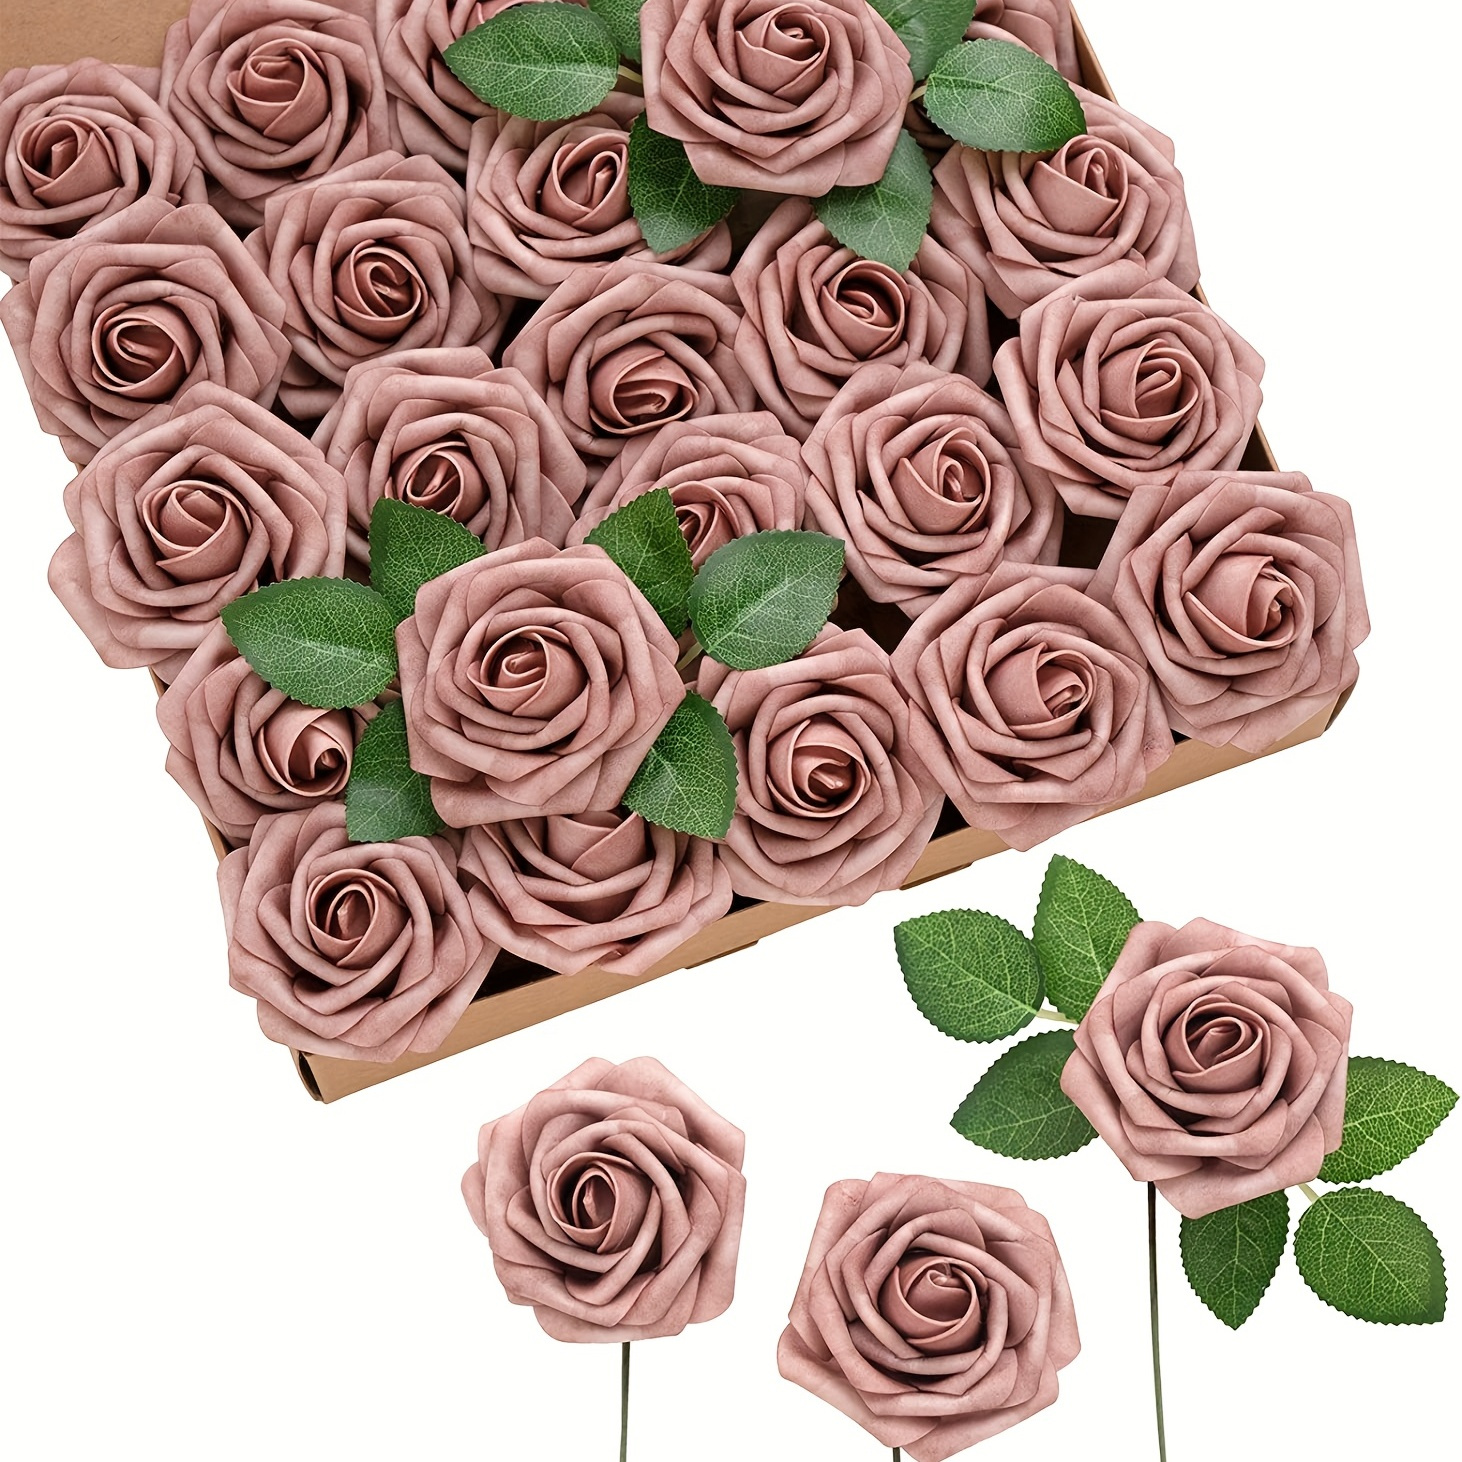 

1pc 25 Dusty Rose Artificial Roses Flowers, Fake Roses With Stem For Diy Craft Outdoor Wedding Party Banquet Celebration Birthday Bouquets Centerpieces Bridal Shower Arrangements Indoor Decorations